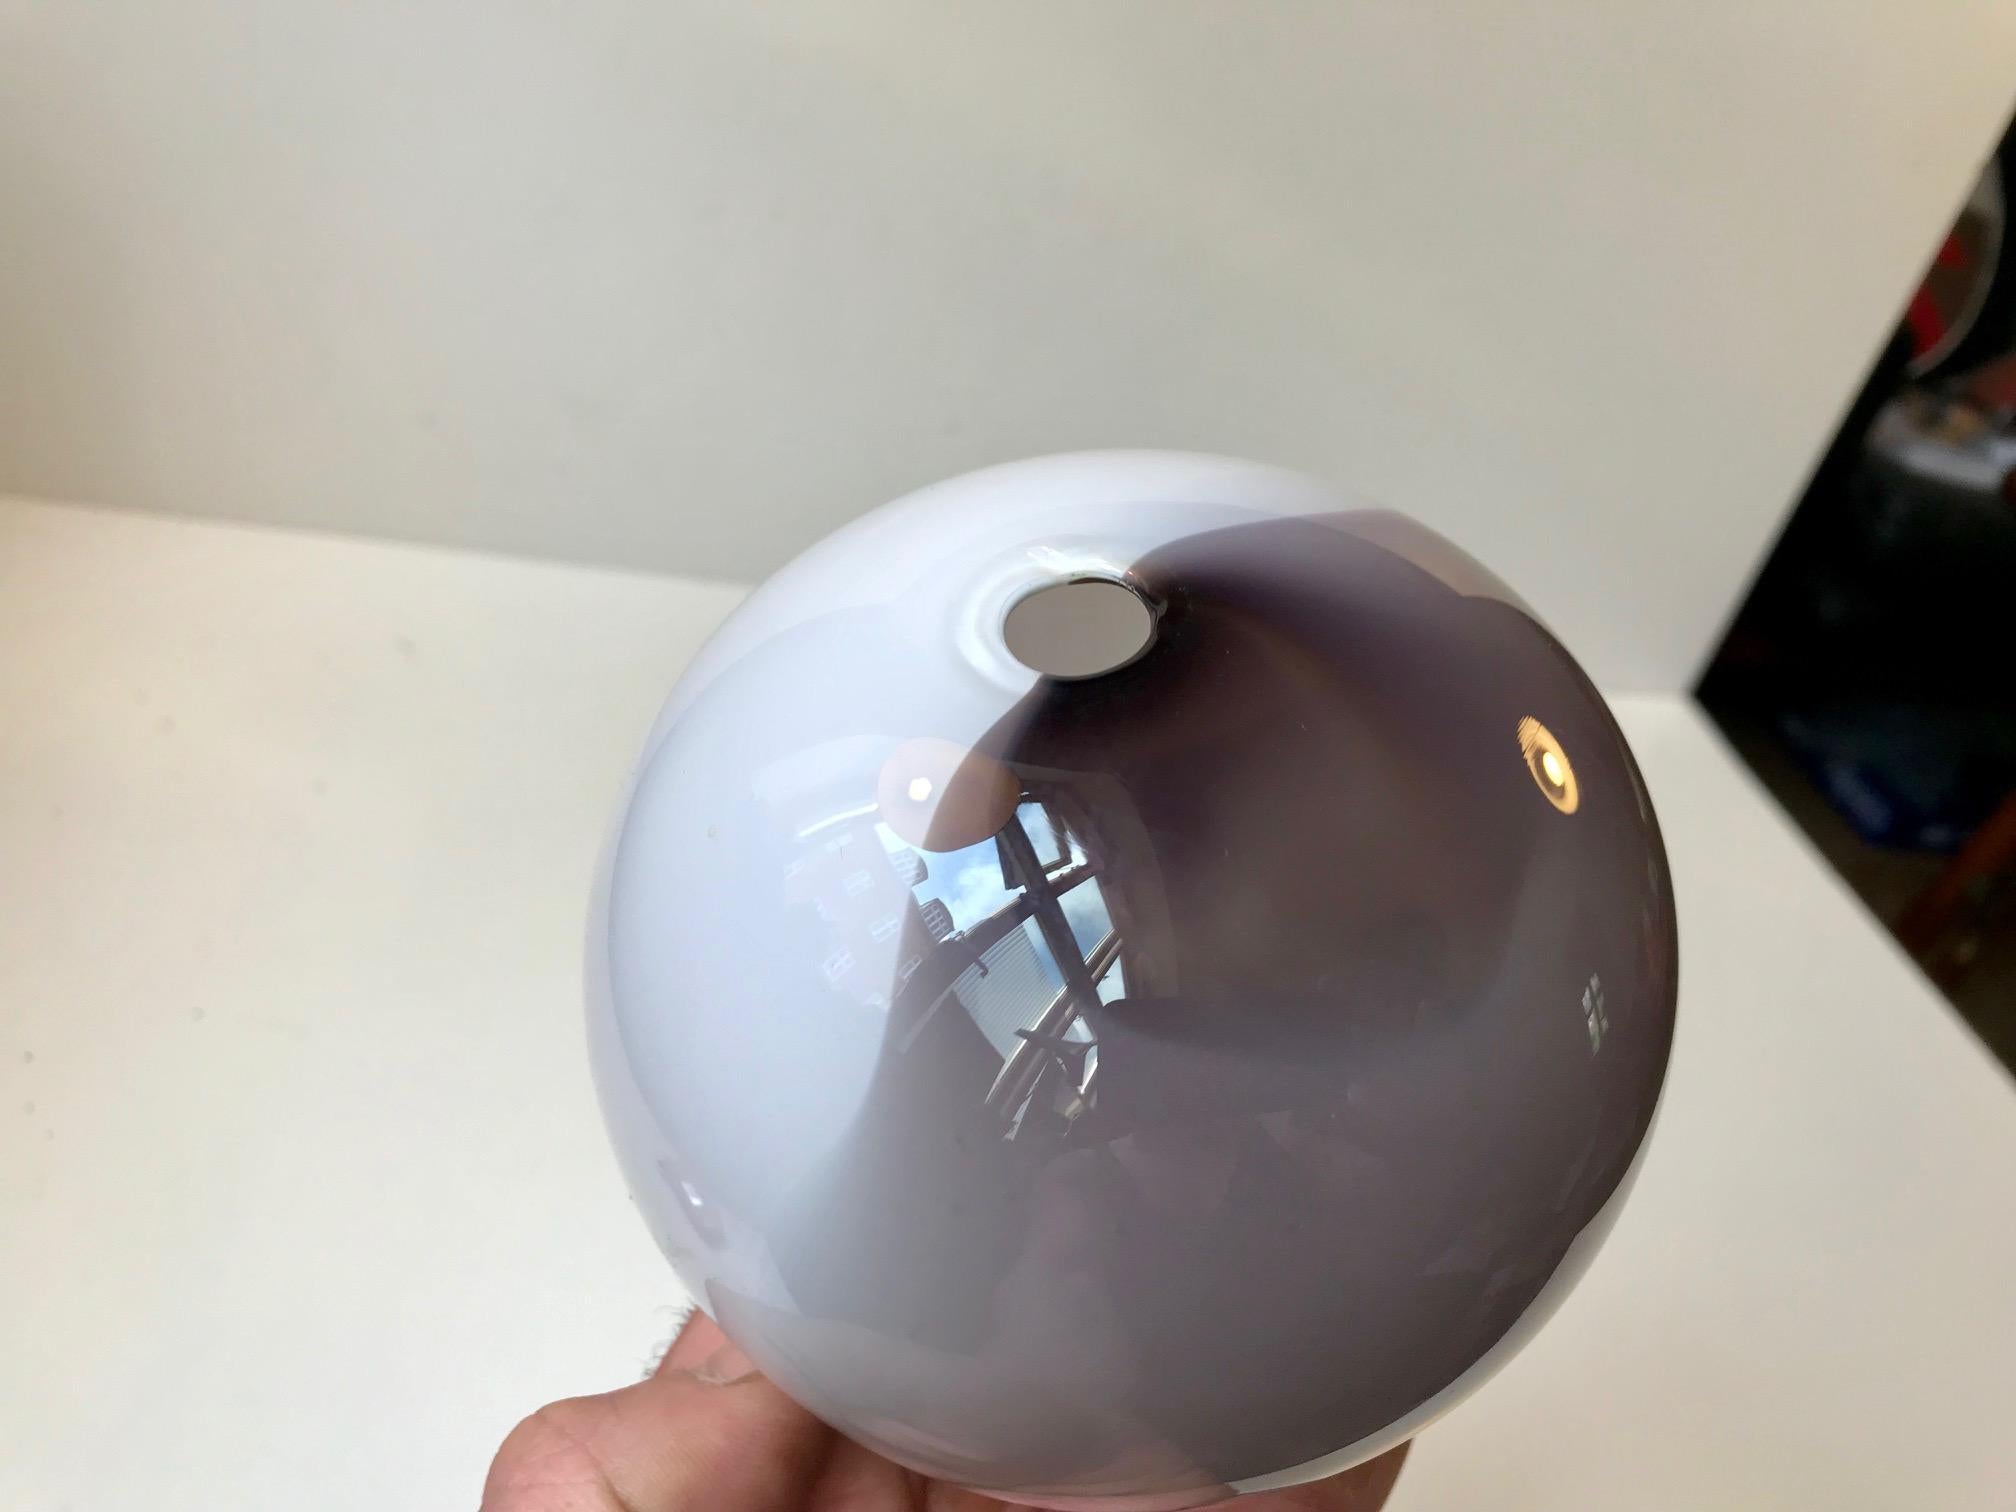 This ball shaped vase is made of hand blown glass. One half is in purple and one half is in white opaline glass. Its signed by hand by the maker and designer (RG) and dated 1984.